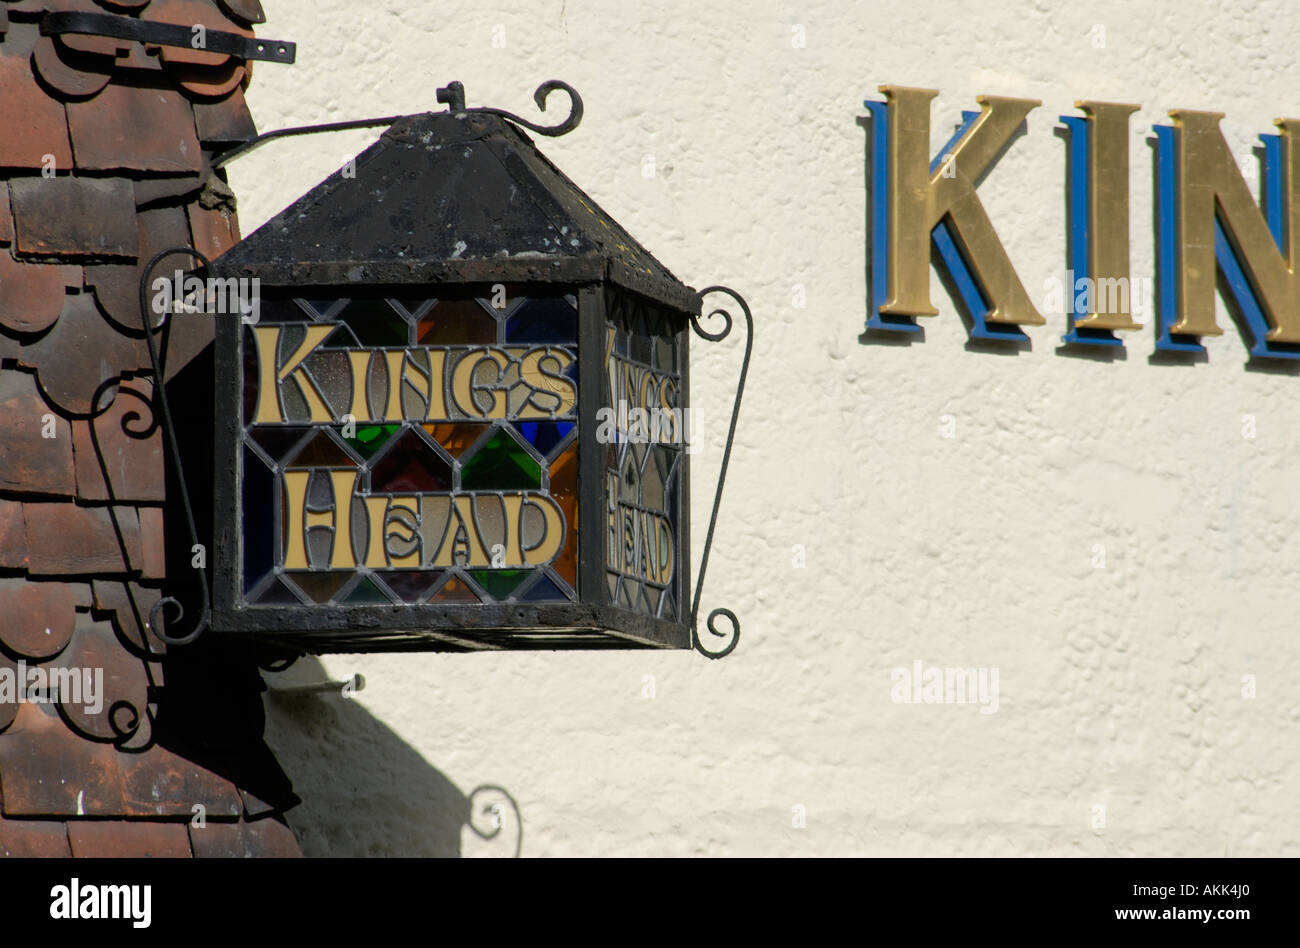 Pub sign for the Kings Head in the form of a leaded lantern with coloured glass Staplehurst Kent England UK 08 August 2006 Stock Photo